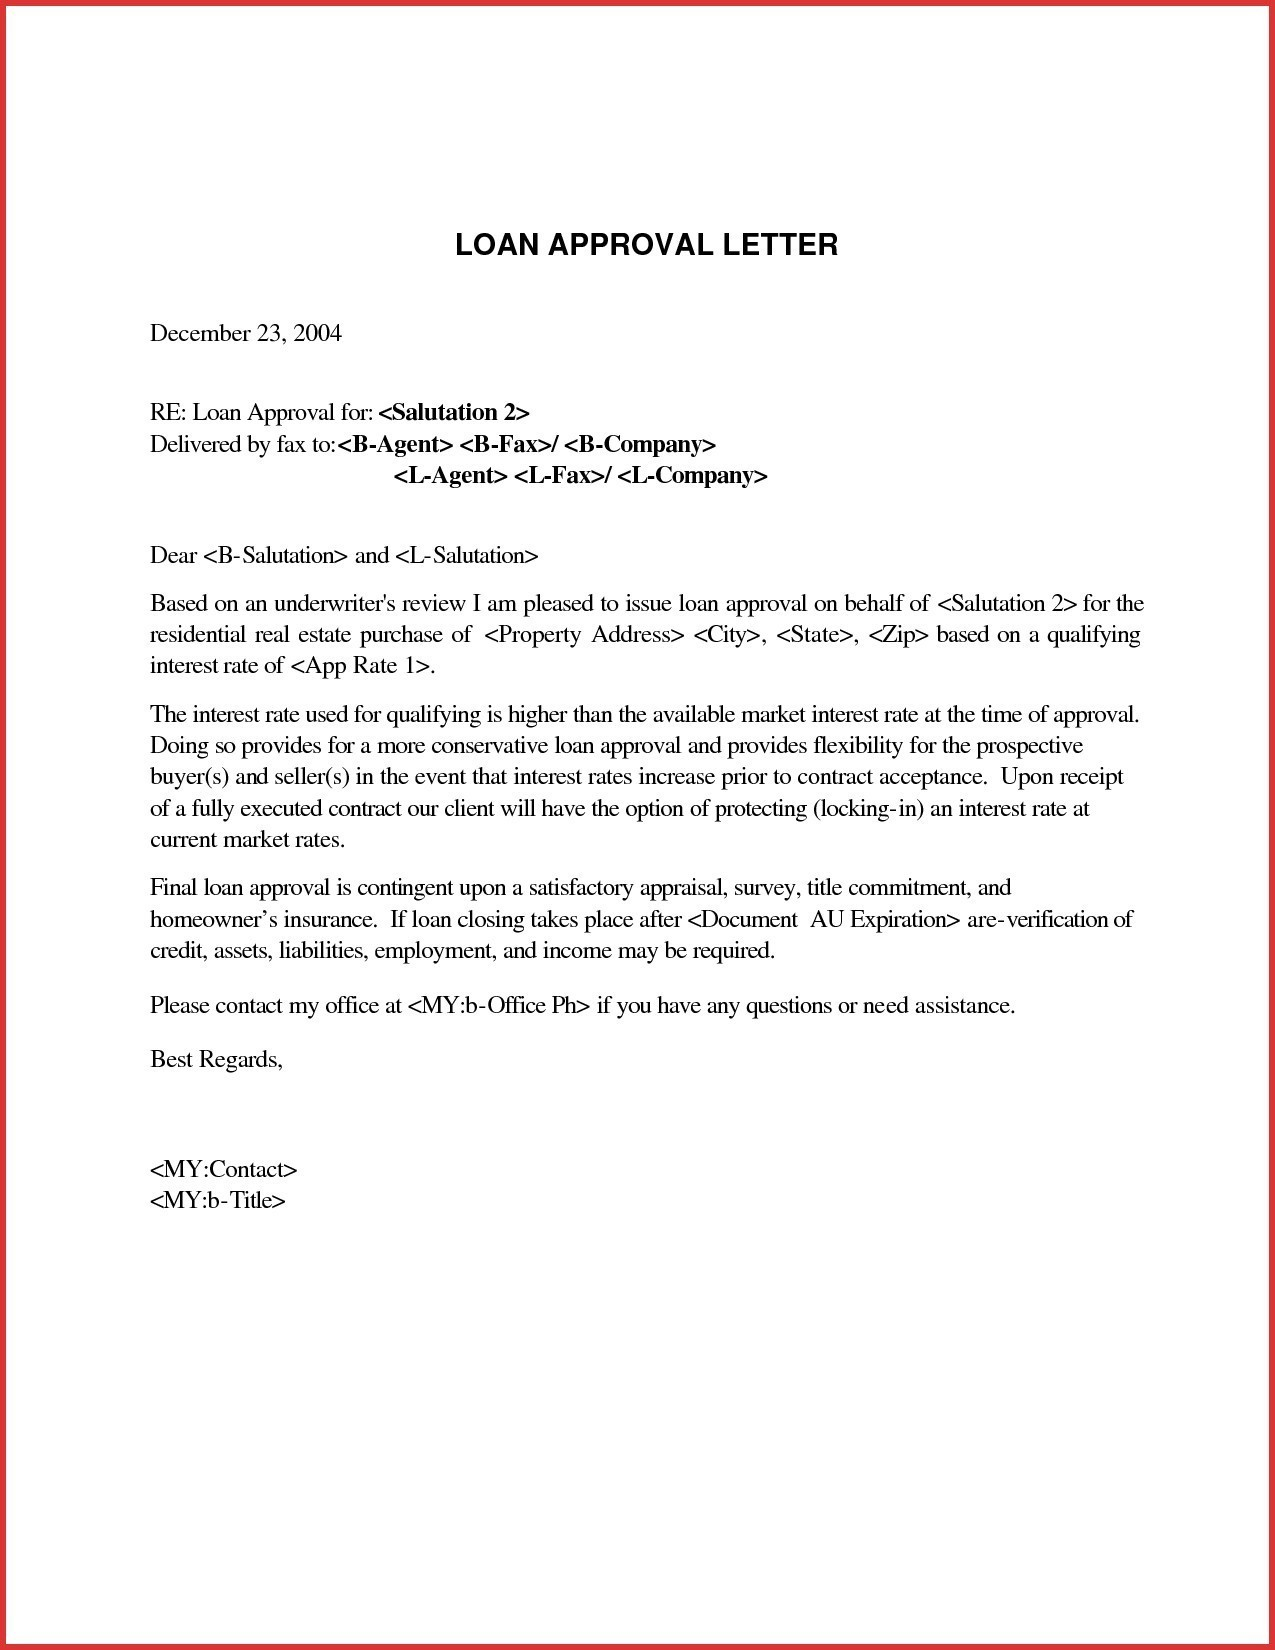 Mortgage Loan Approval Letter Template - Letter format for Loan Request From Employer New Loan Request Letter